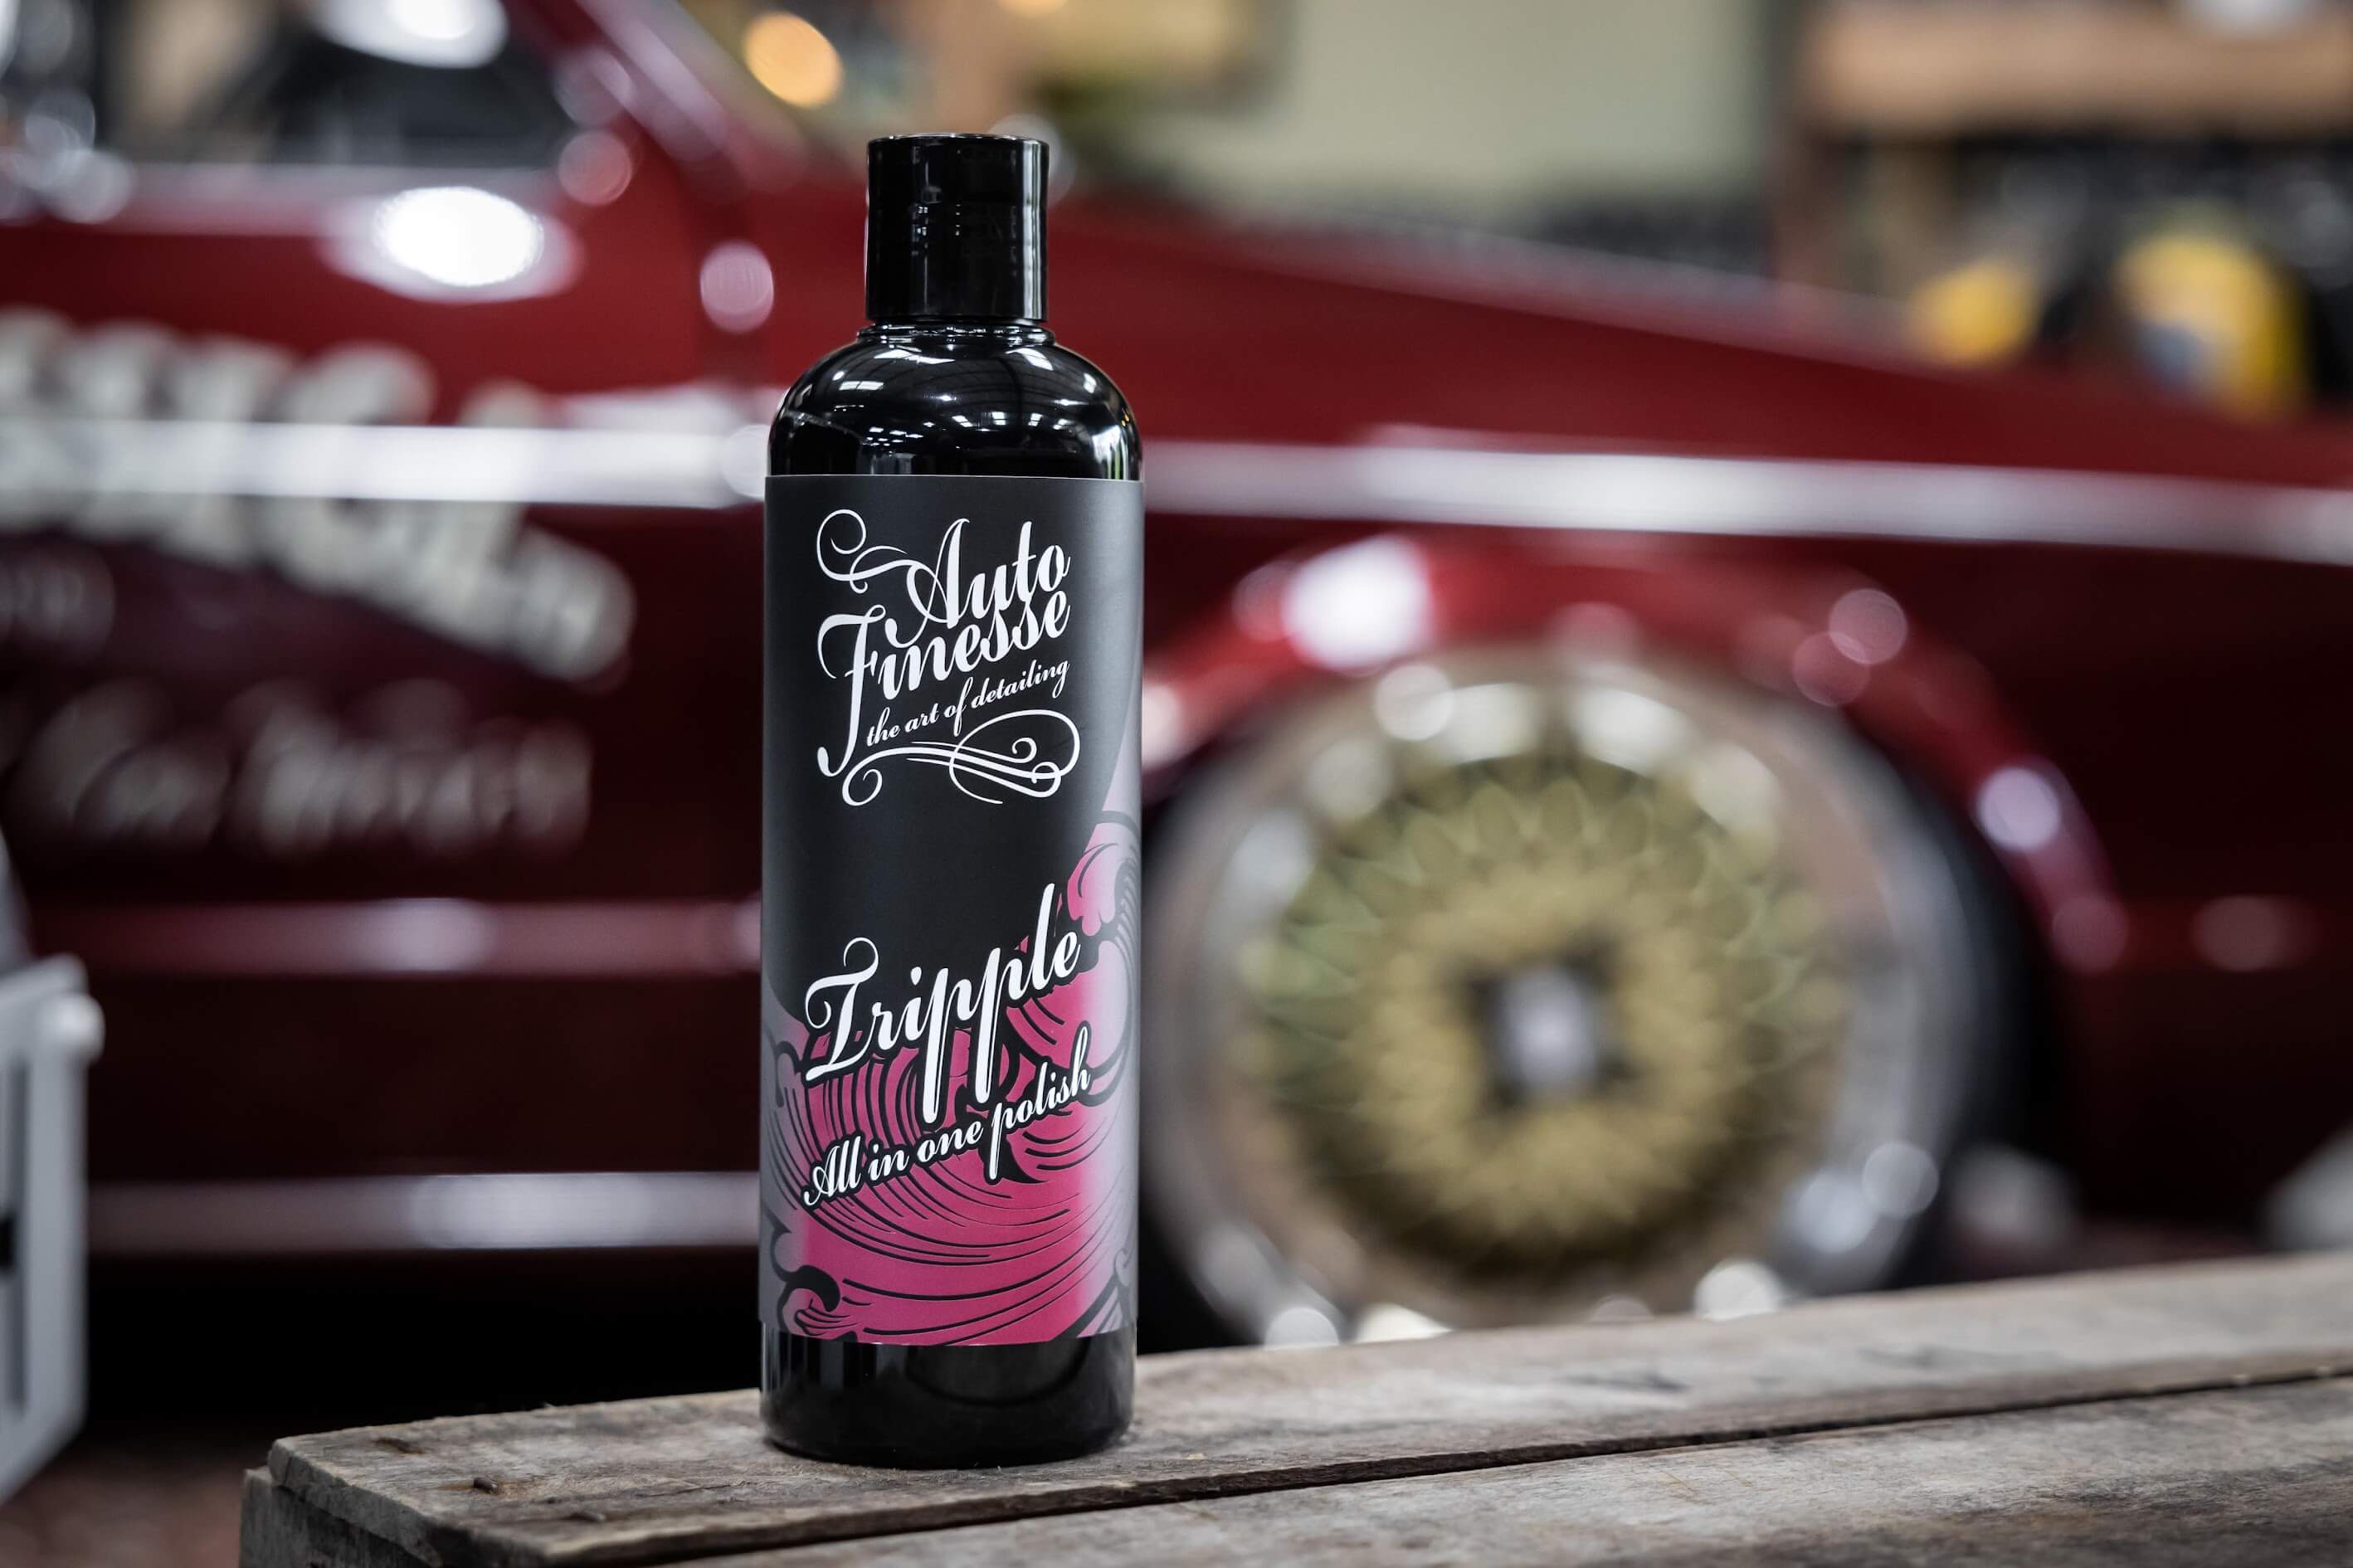 Auto Finesse | Tripple Car Polish, Cleaner Wax | Cut, Fill Protect In One